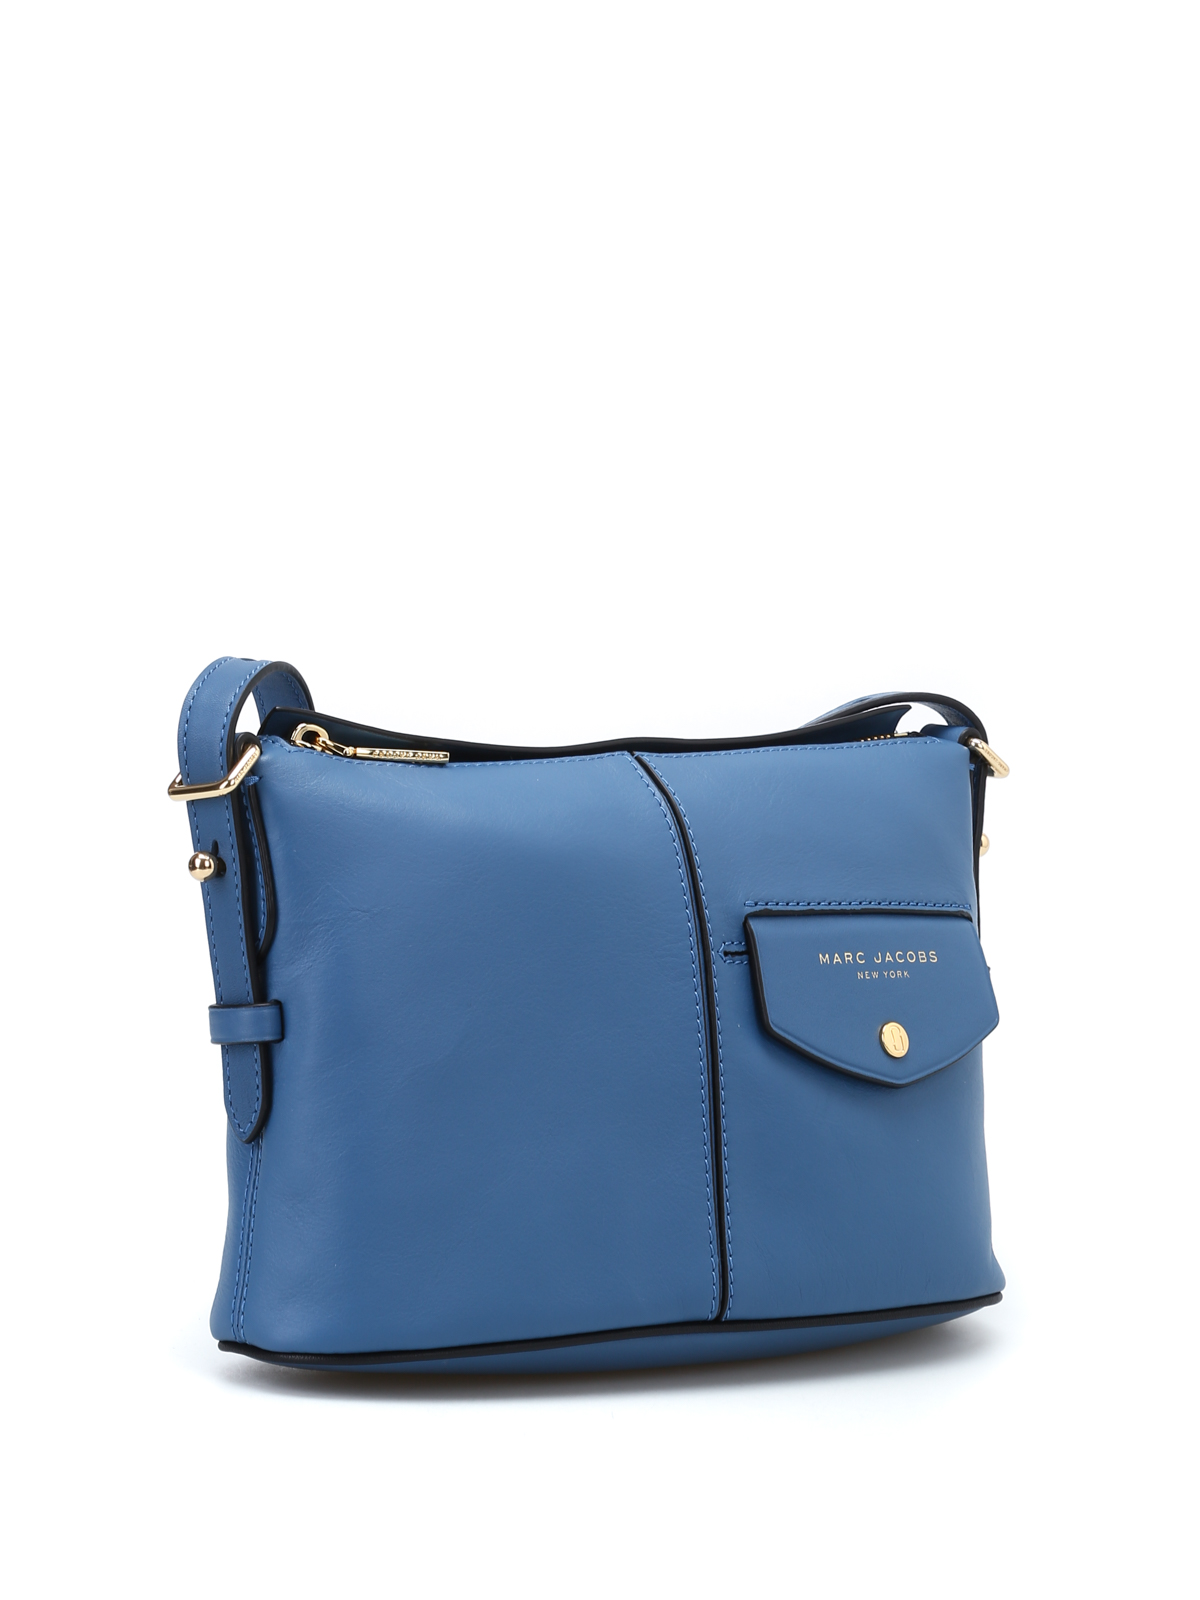 Cross body bags Marc Jacobs - Side Sling blue leather bag